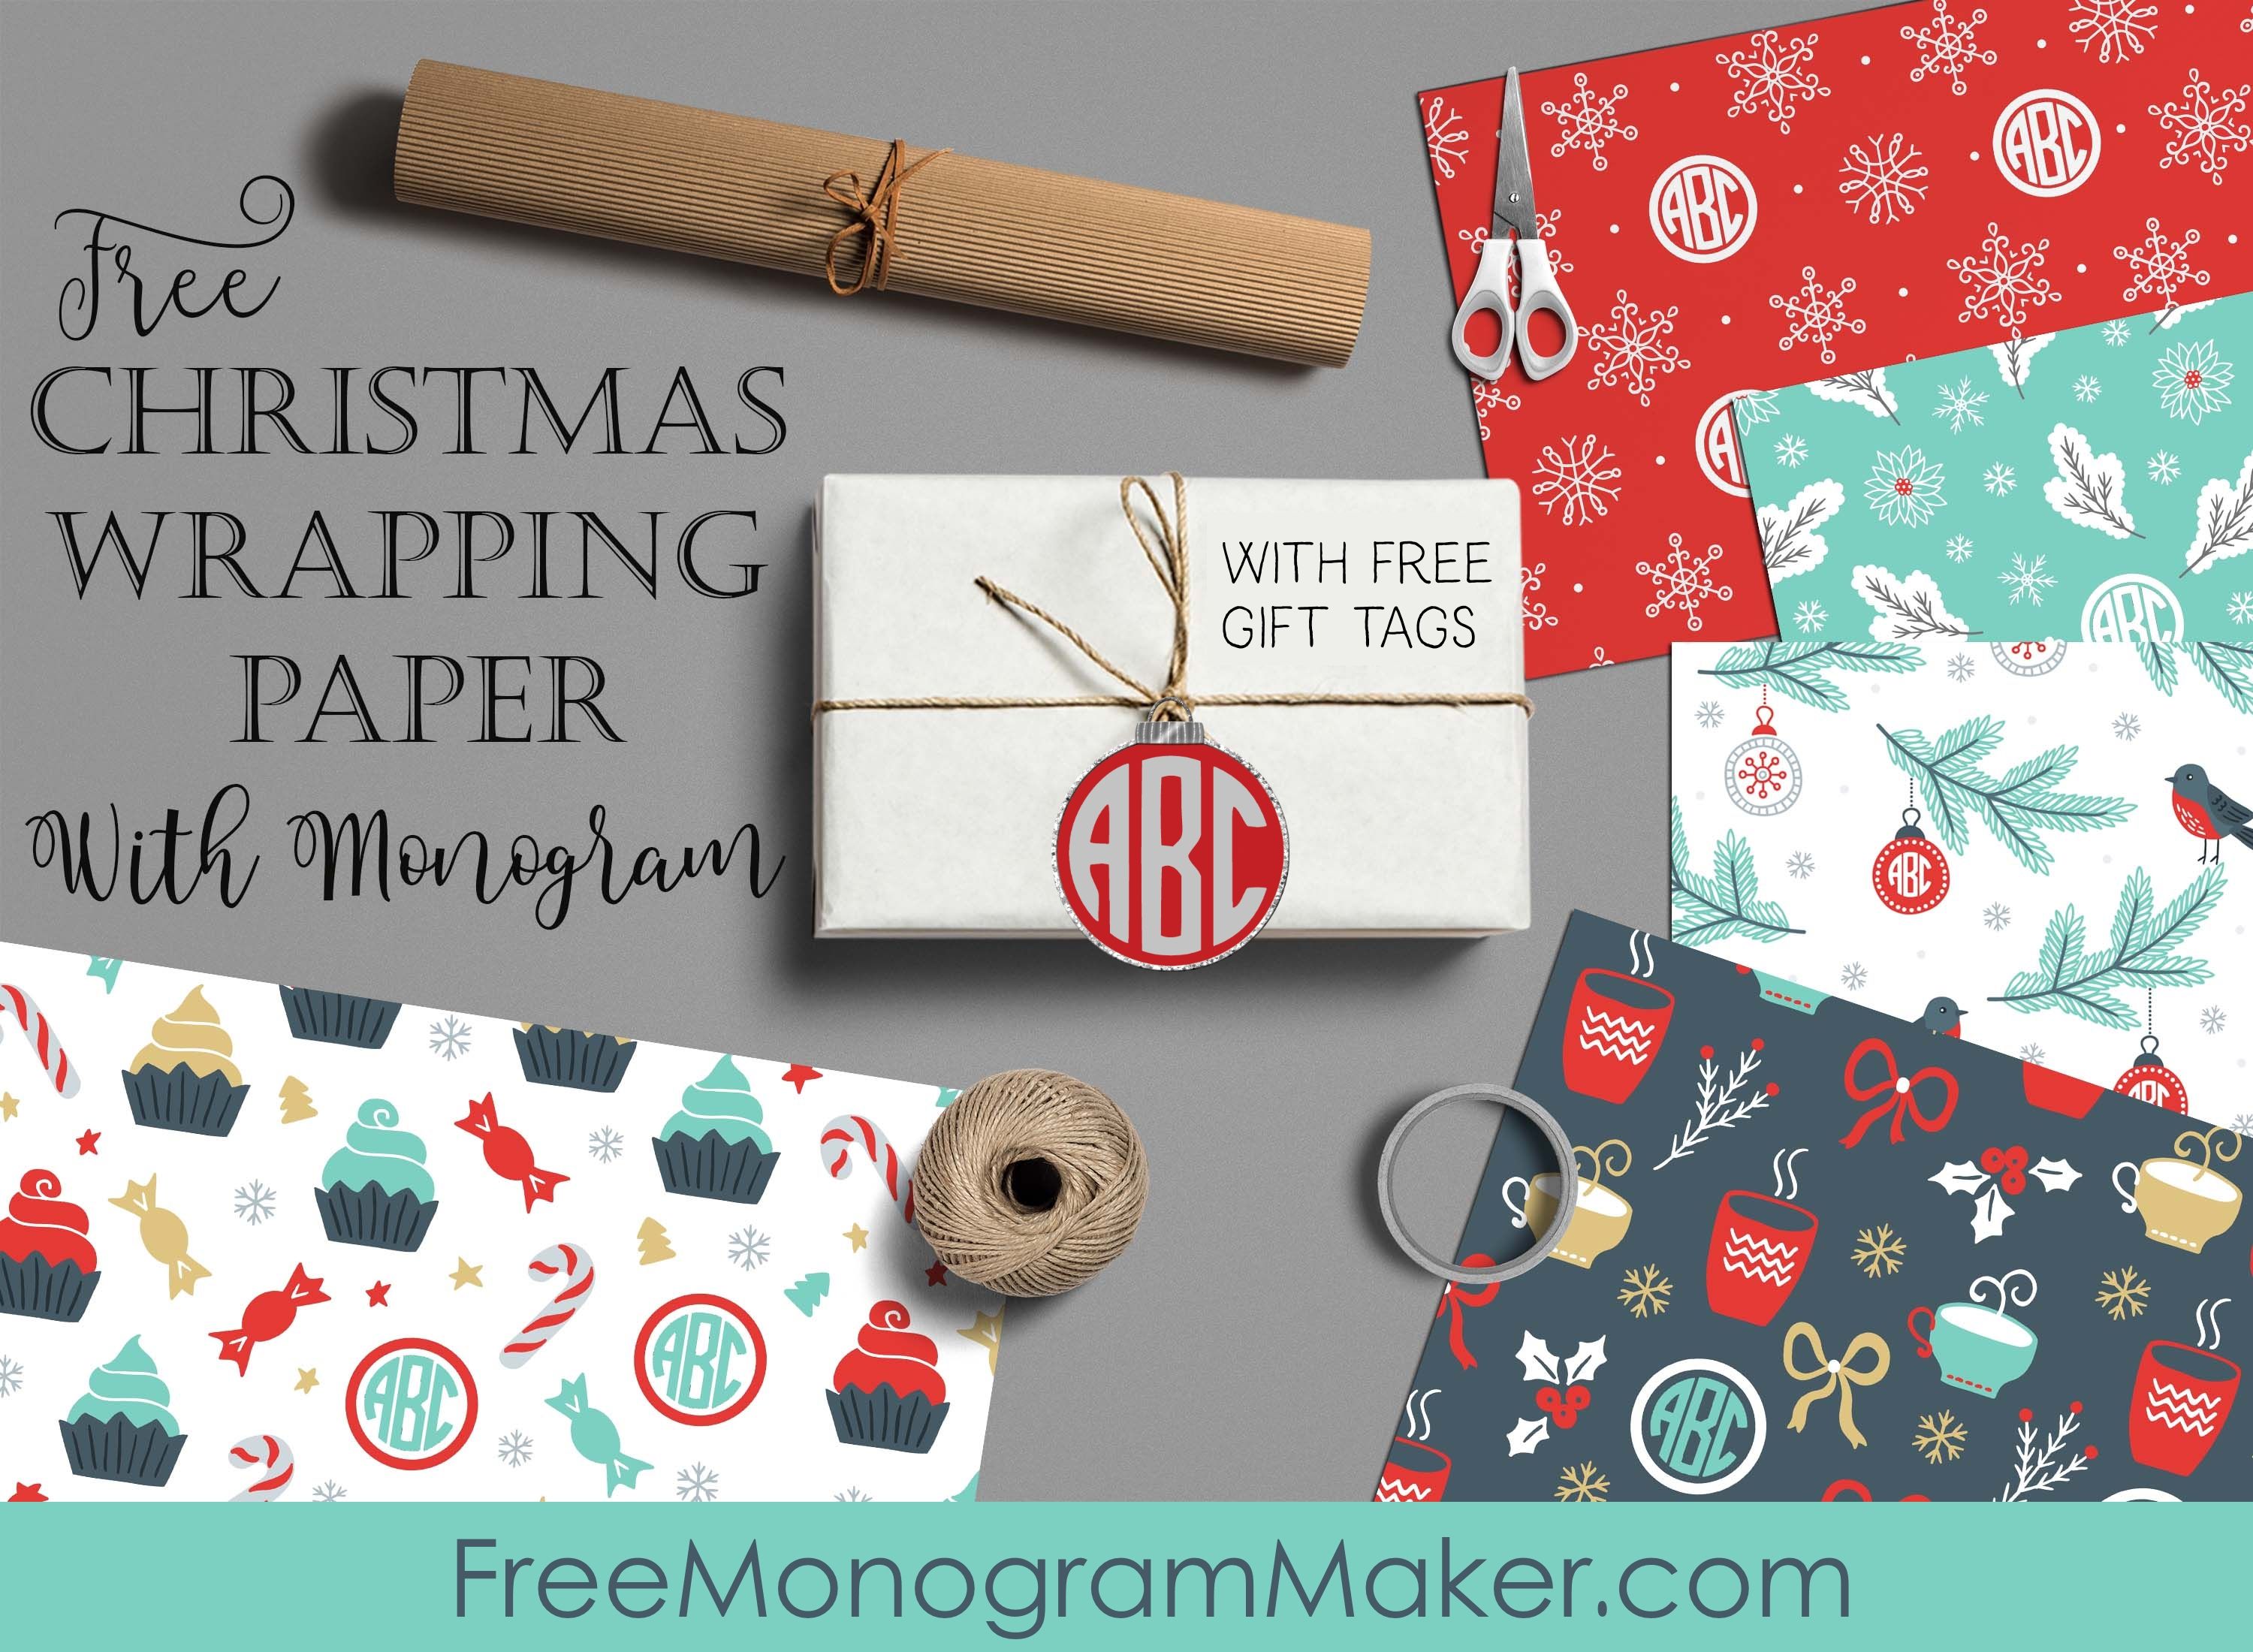 Christmas Wrapping Paper with Monogram